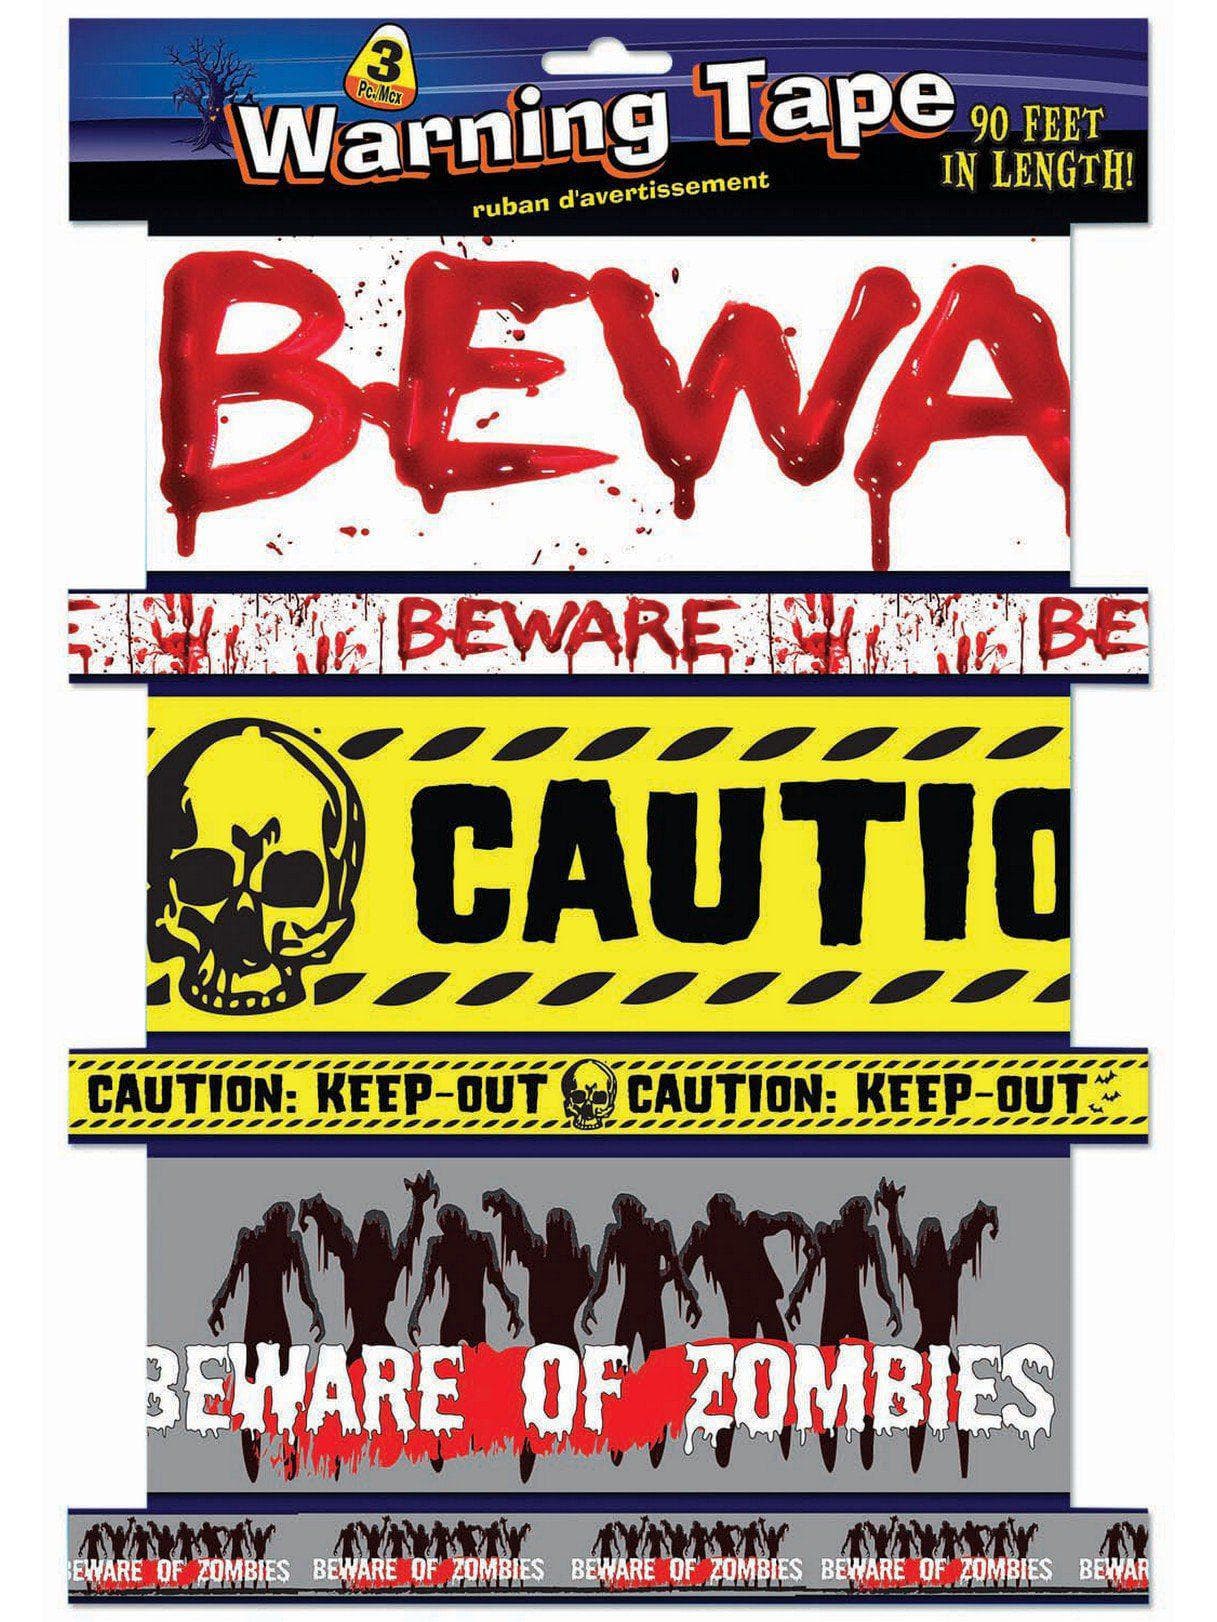 Halloween Beware and Caution Tape Variety Pack - costumes.com